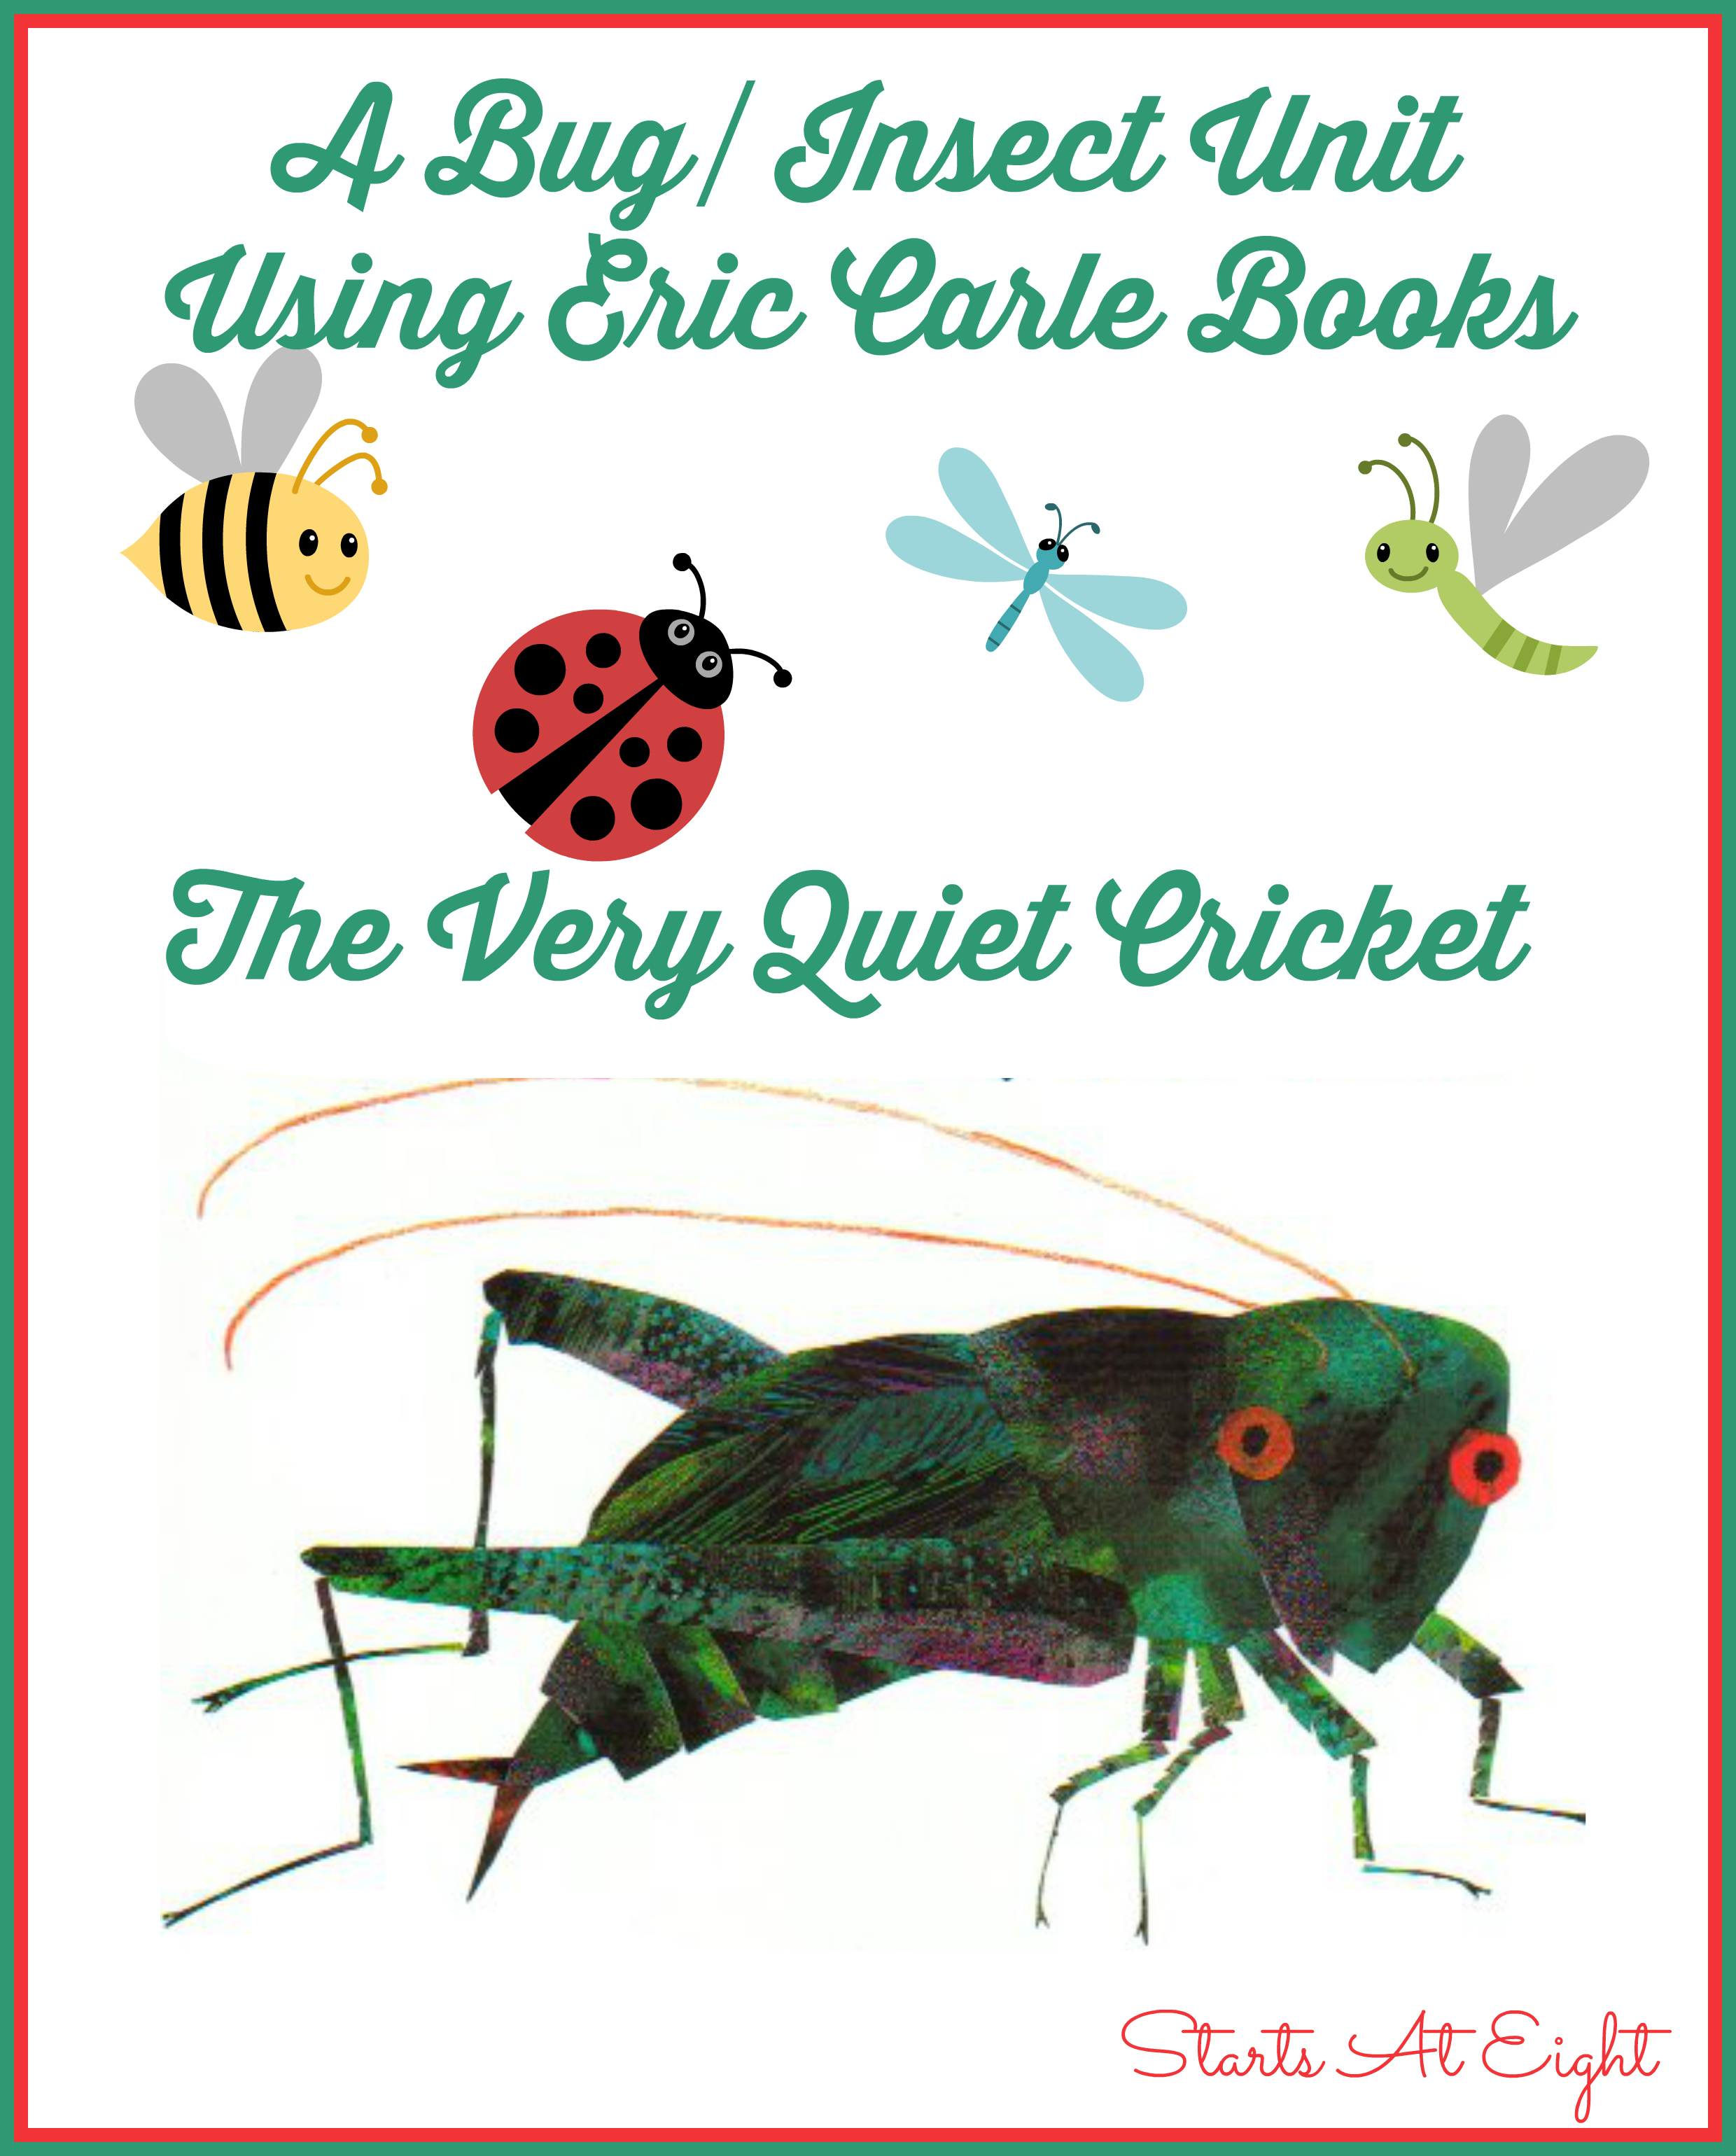 A Bug/Insect Unit Using Eric Carle Books ~ The Very Quiet Cricket